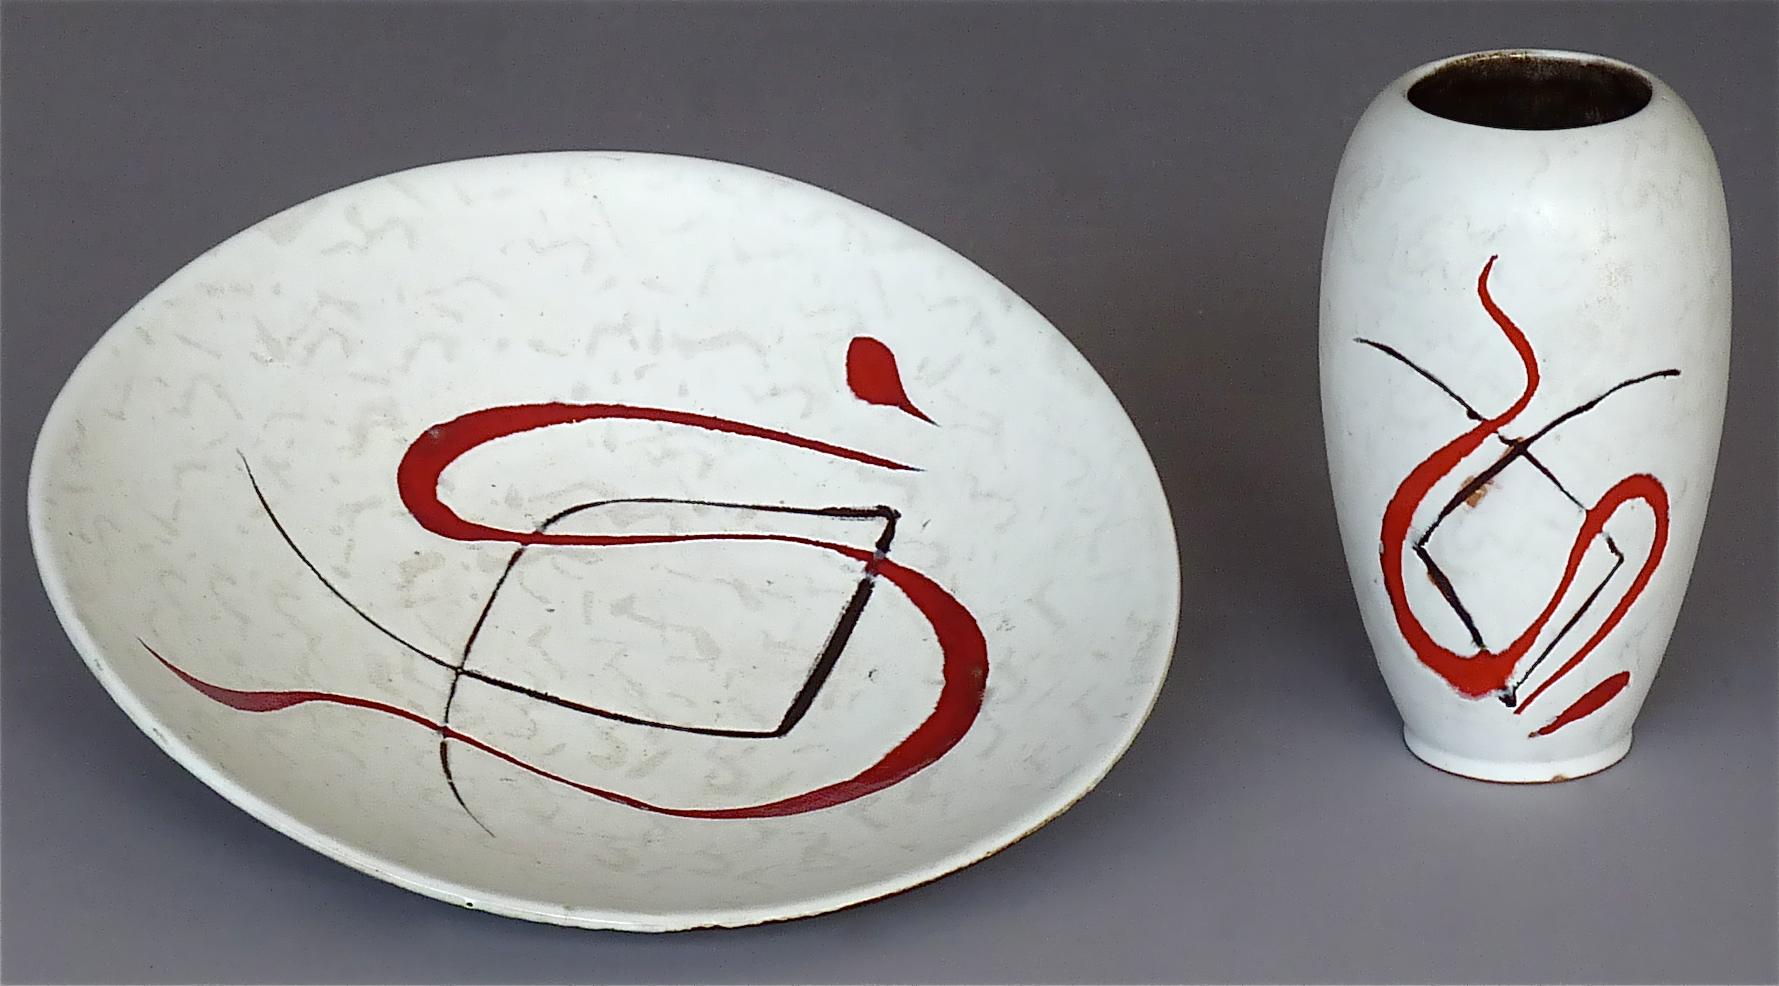 Abstract Midcentury Art Ceramic Vase and Bowl Gambone Miro Style White Red 1950s For Sale 12